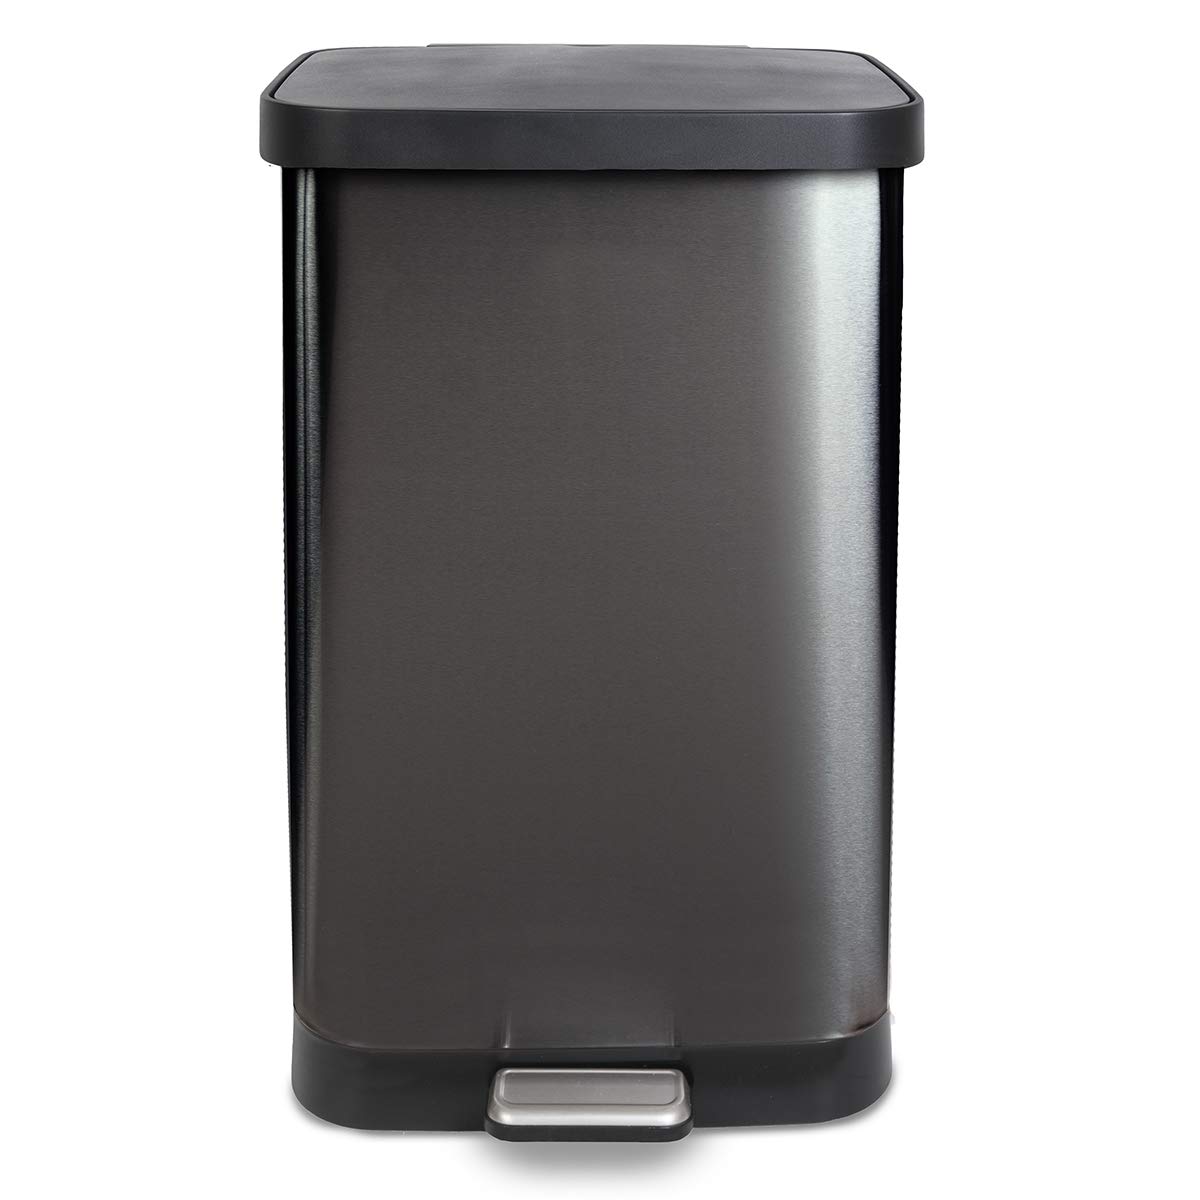 https://bigbigmart.com/wp-content/uploads/2023/05/Glad-20-Gallon-75.5-Liter-Extra-Capacity-Stainless-Steel-Step-Trash-Can-with-CloroxTM-Odor-Protection-Pewter7.jpg